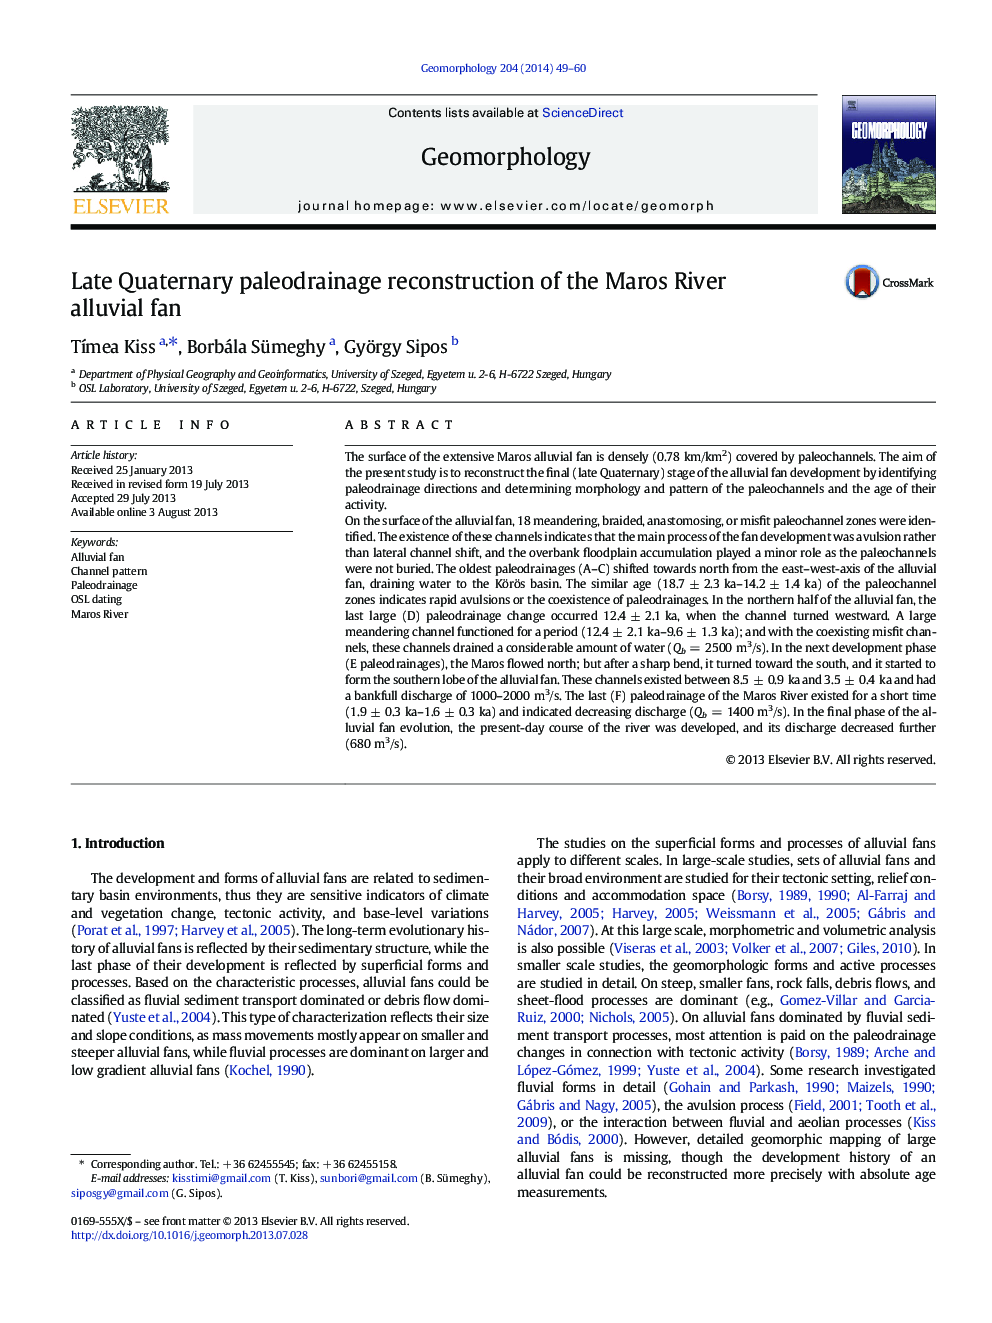 Late Quaternary paleodrainage reconstruction of the Maros River alluvial fan